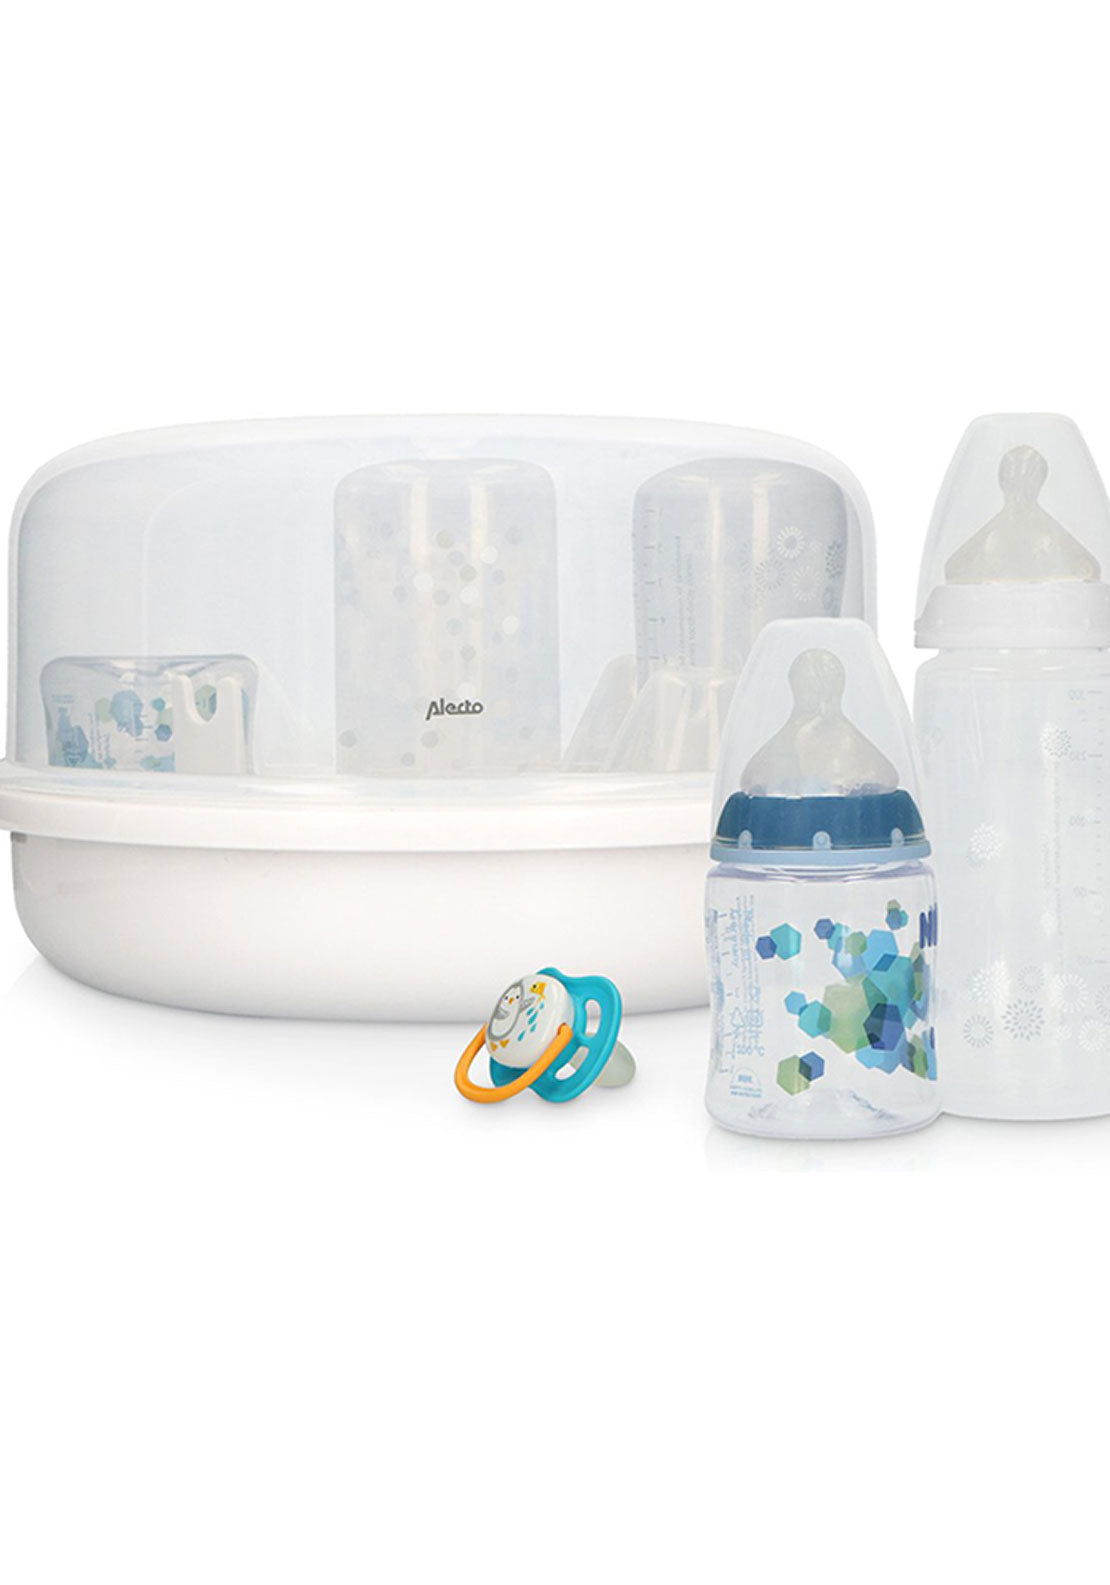 Alecto Microwave Bottle Sterilizer | Bw05 1 Shaws Department Stores